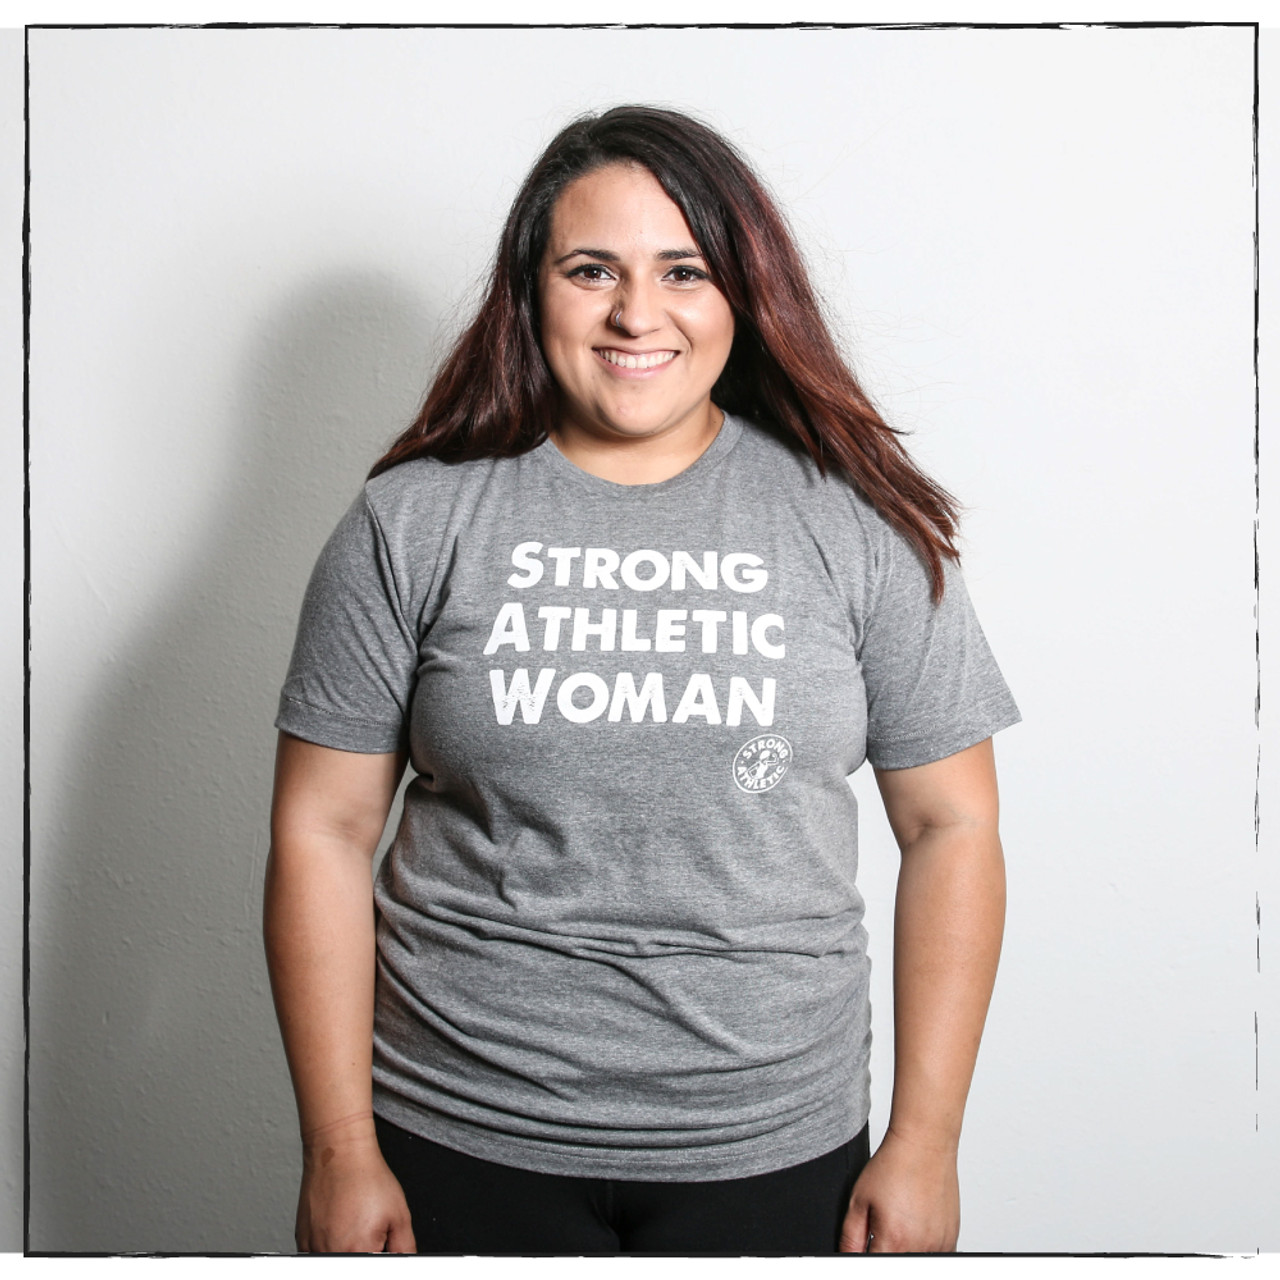 The Original Strong Athletic Woman Shirt by Strong Athletic for